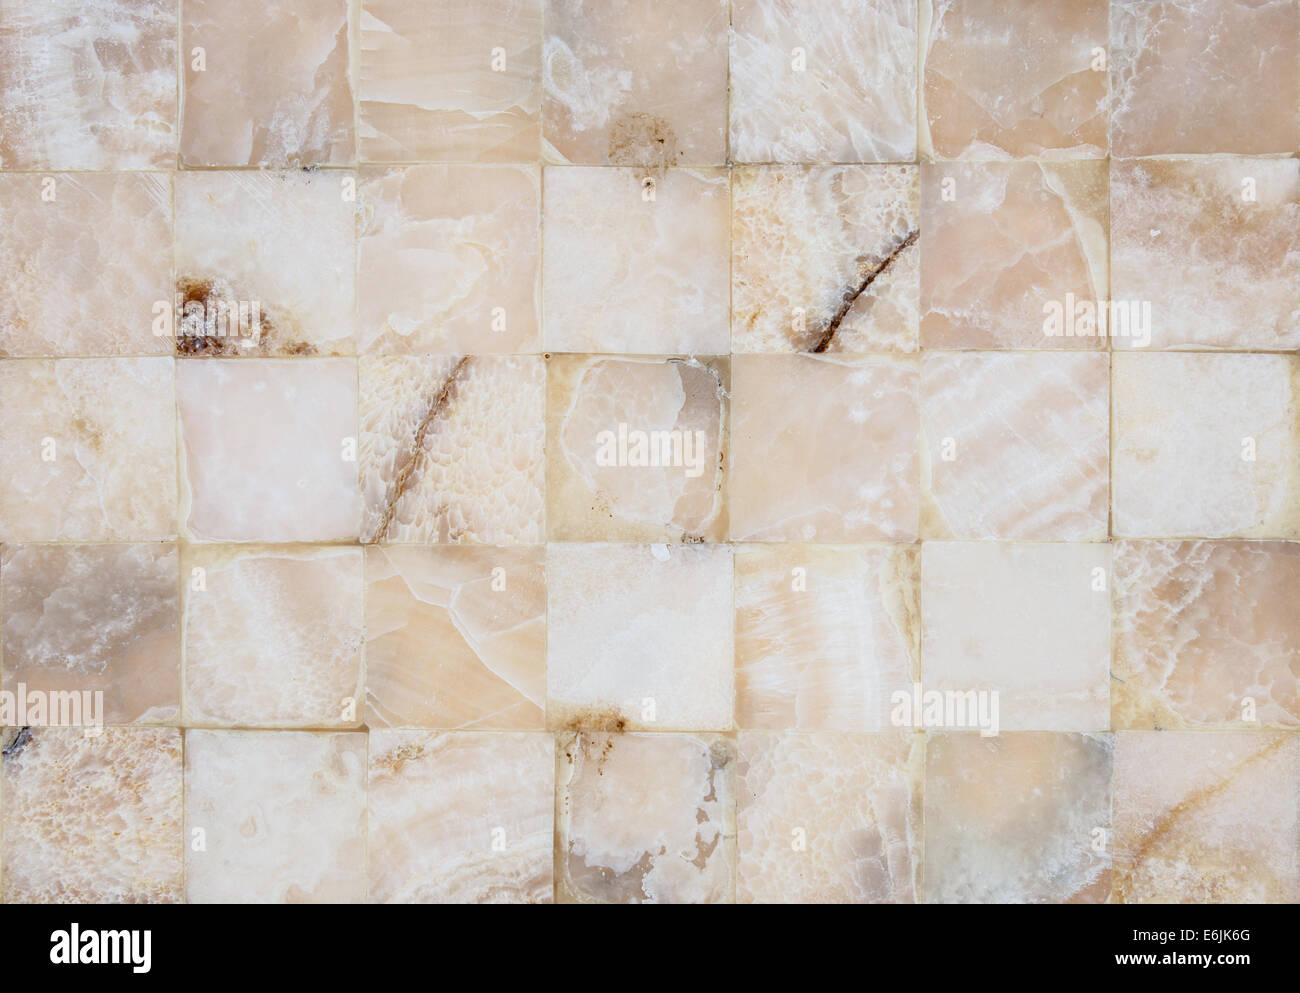 Natural detailed stone mosaic for background or texture Stock Photo